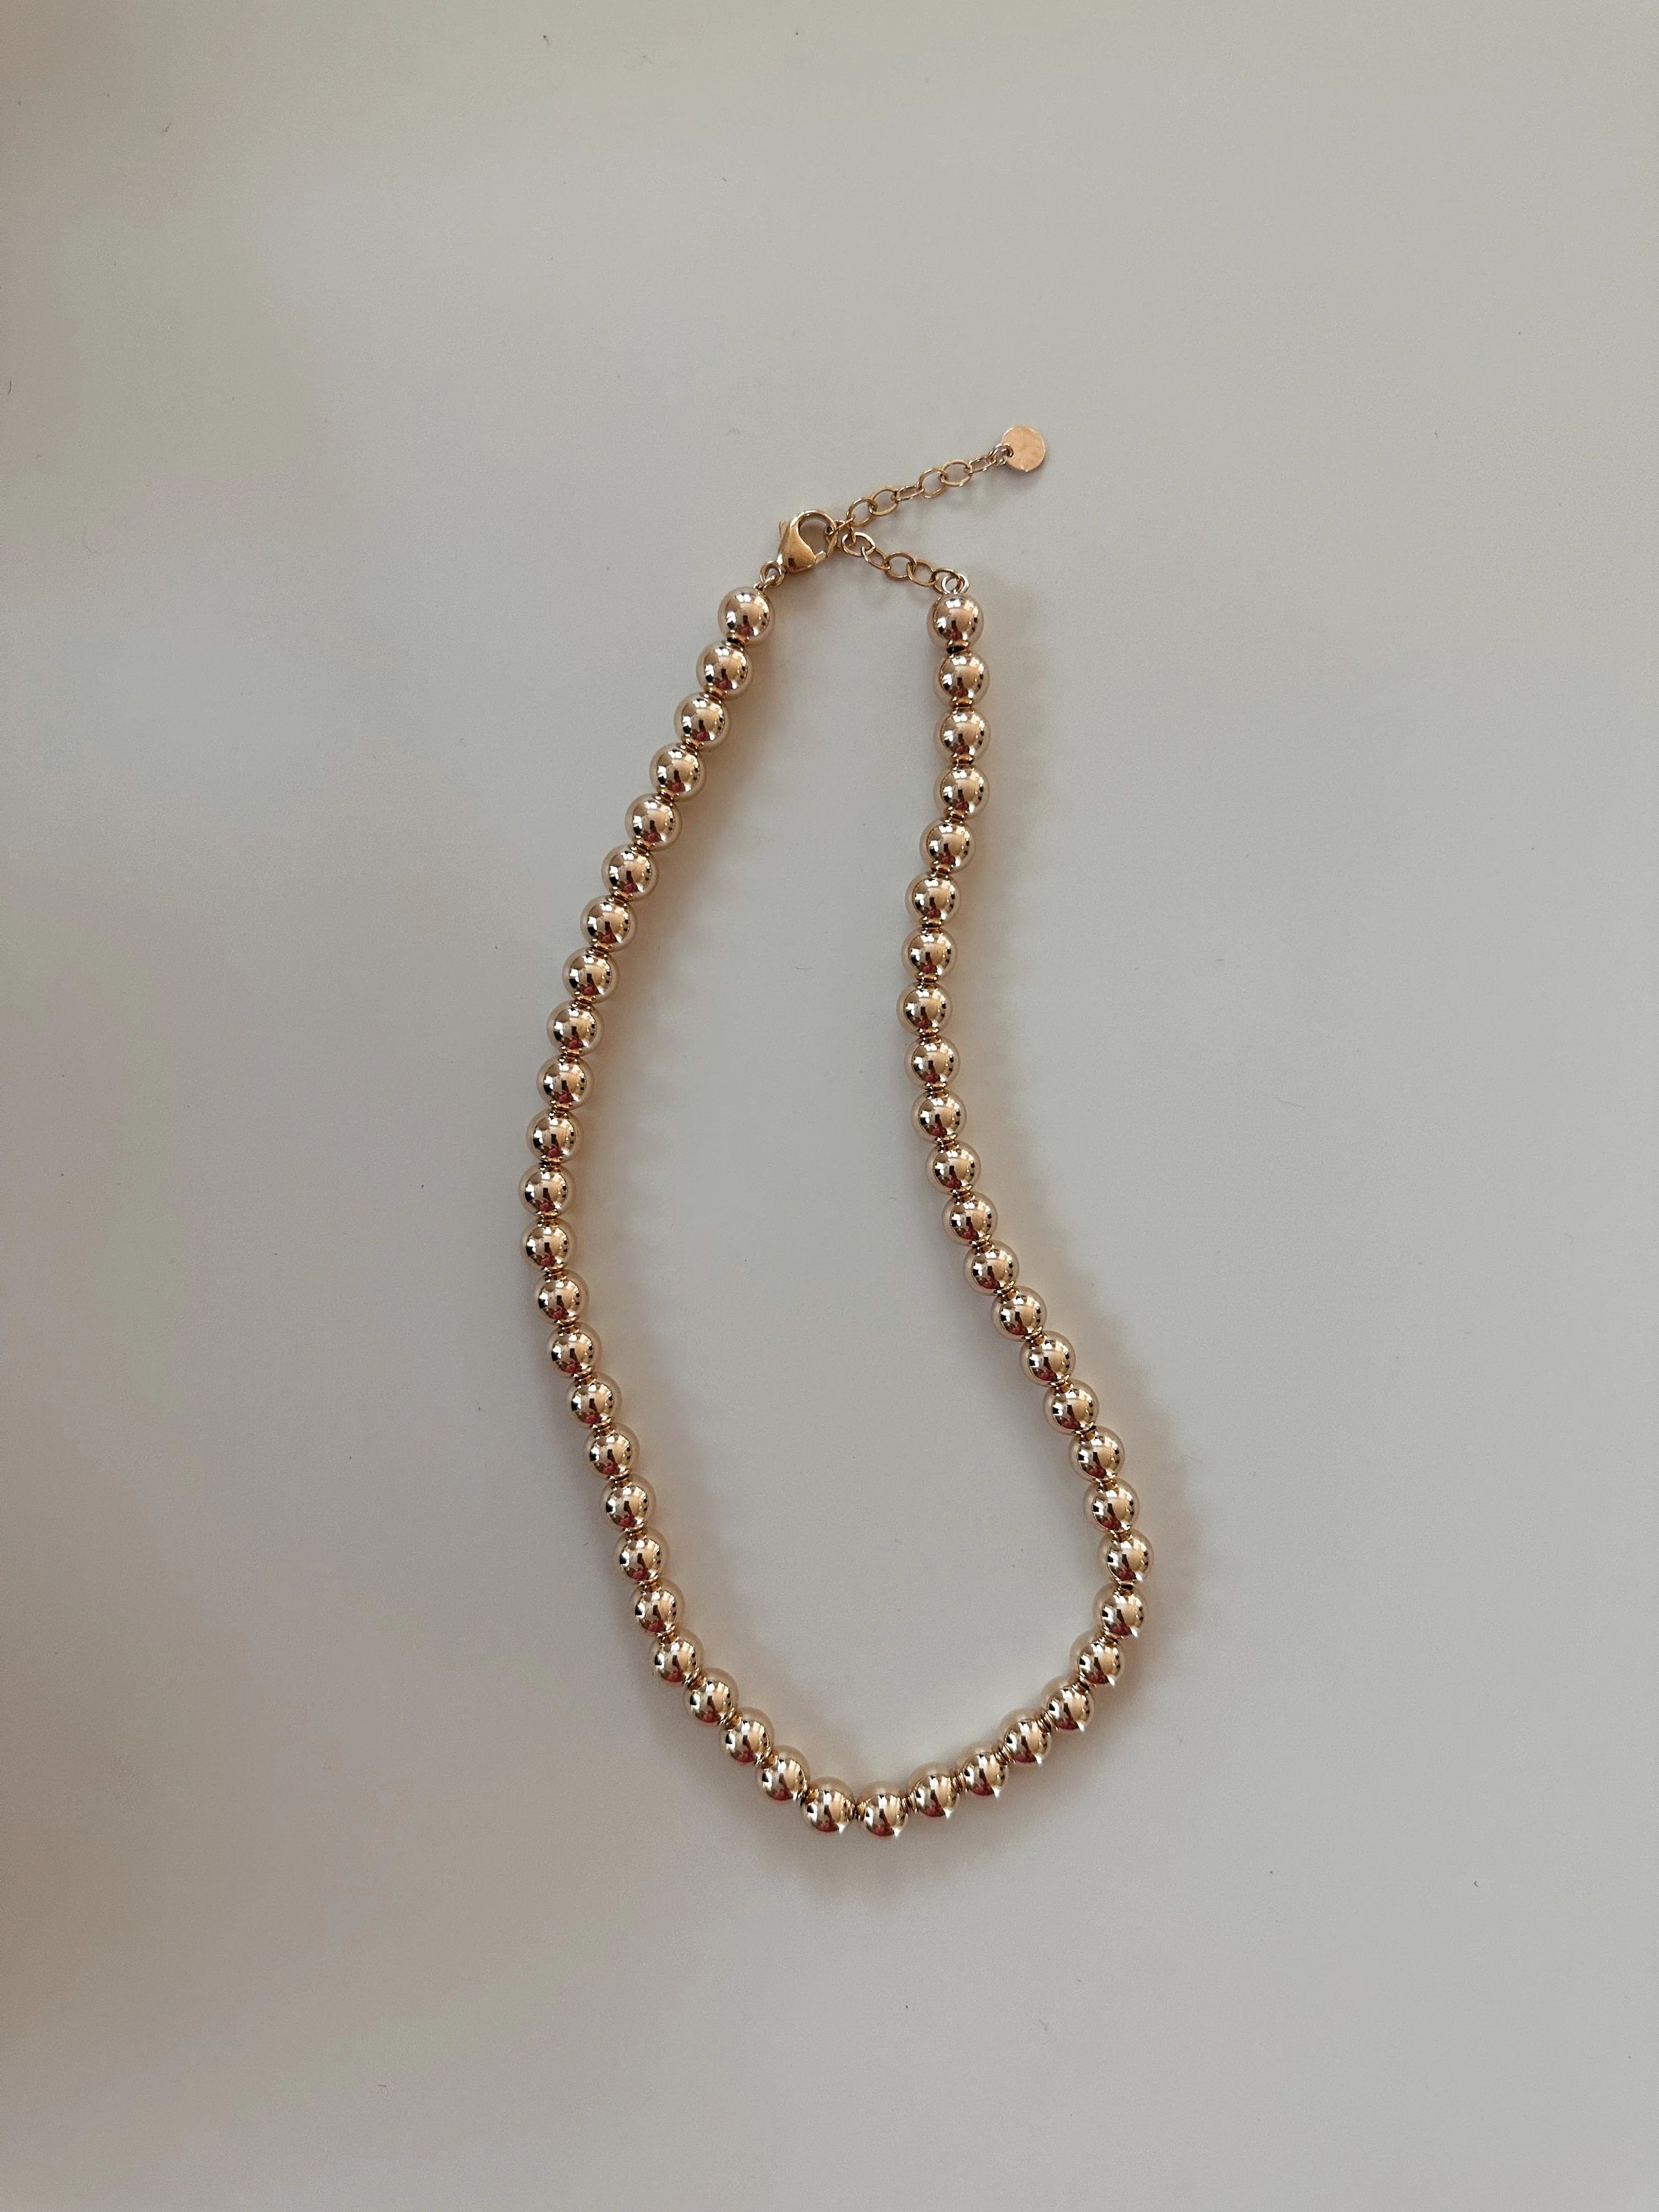 8MM BEADED NECKLACE - GOLD | Stylin by Aylin